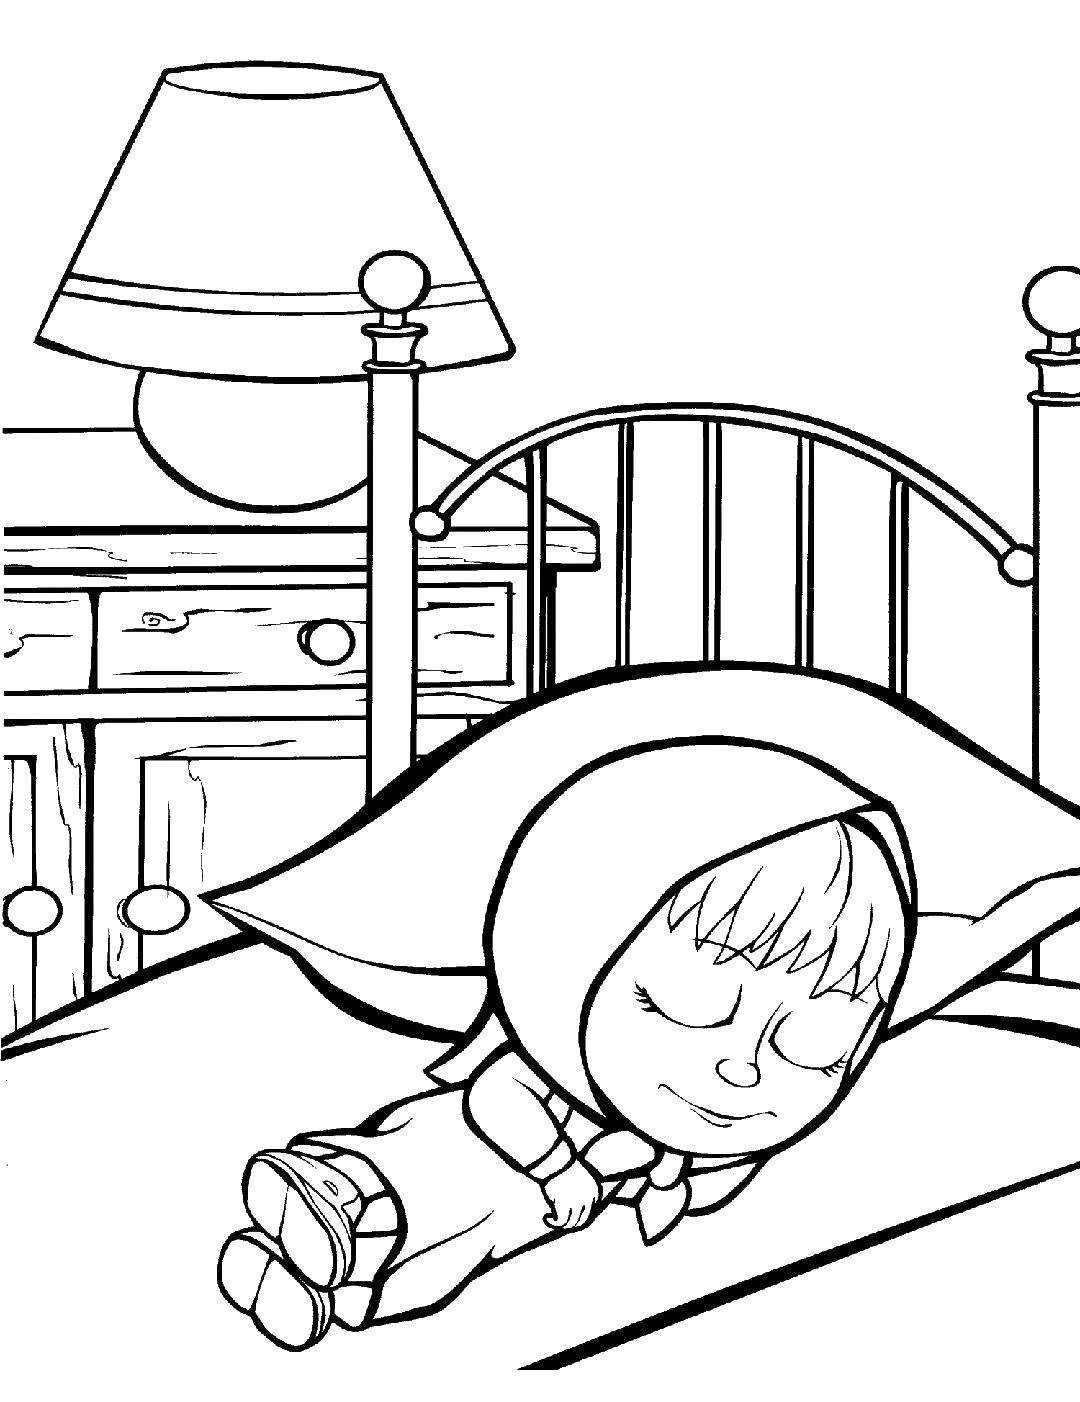 Coloring Masha is asleep. Category The bed. Tags:  Masha and the bear, cartoons, tale.